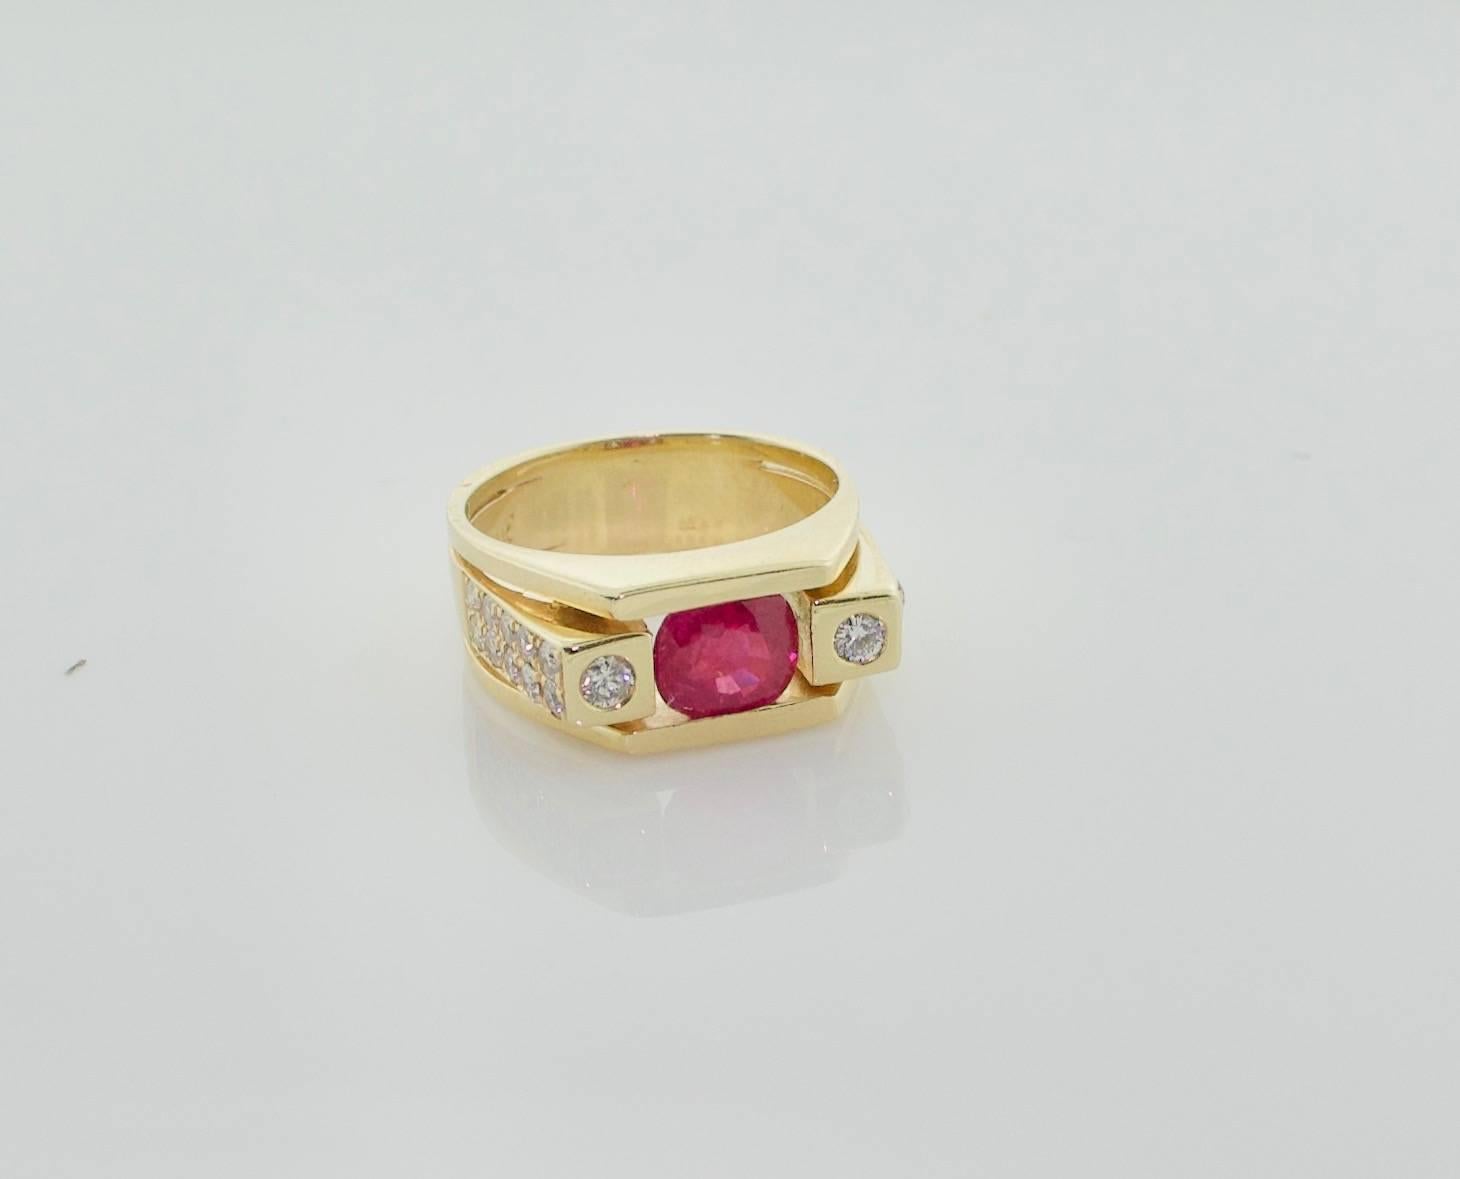 Burma Ruby and Diamond Ring in 14k Yellow Gold
A Cushion Cut Burmese Ruby weighing 1.50 carats approximately
Twenty Two Round Brilliant Cut Diamonds weighing .50 carats approximately GH VVS-VS1 
Signed HH.  Harry Hamlin?  Herman Hees?  Your Guess is